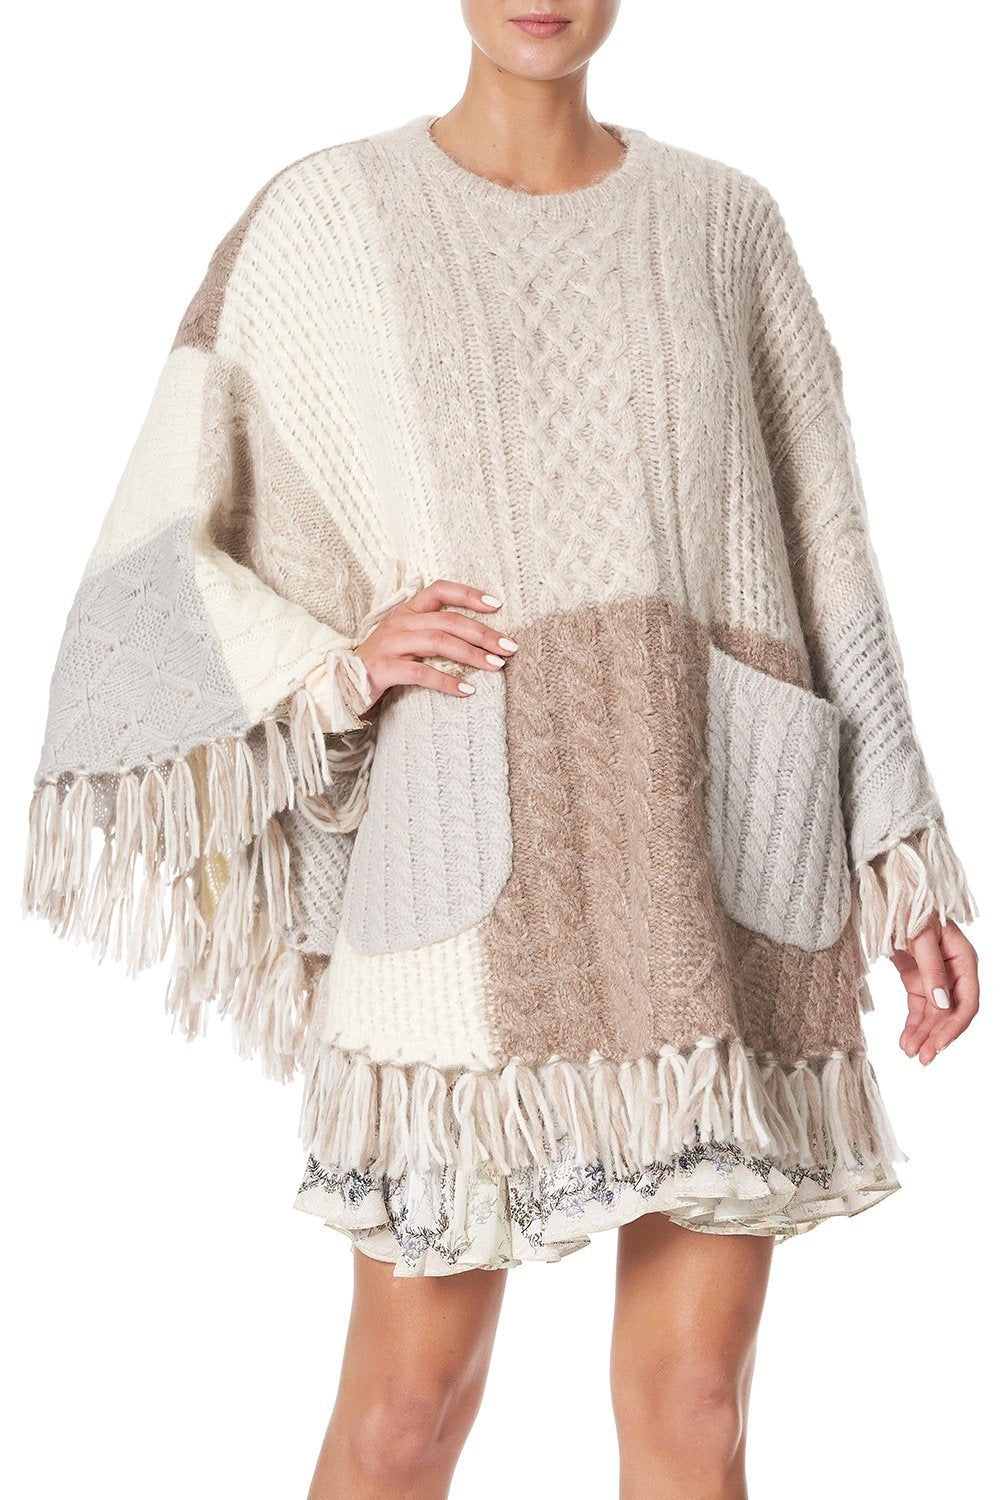 ROUND NECK PONCHO WITH POCKETS COUNTRY DIARIES